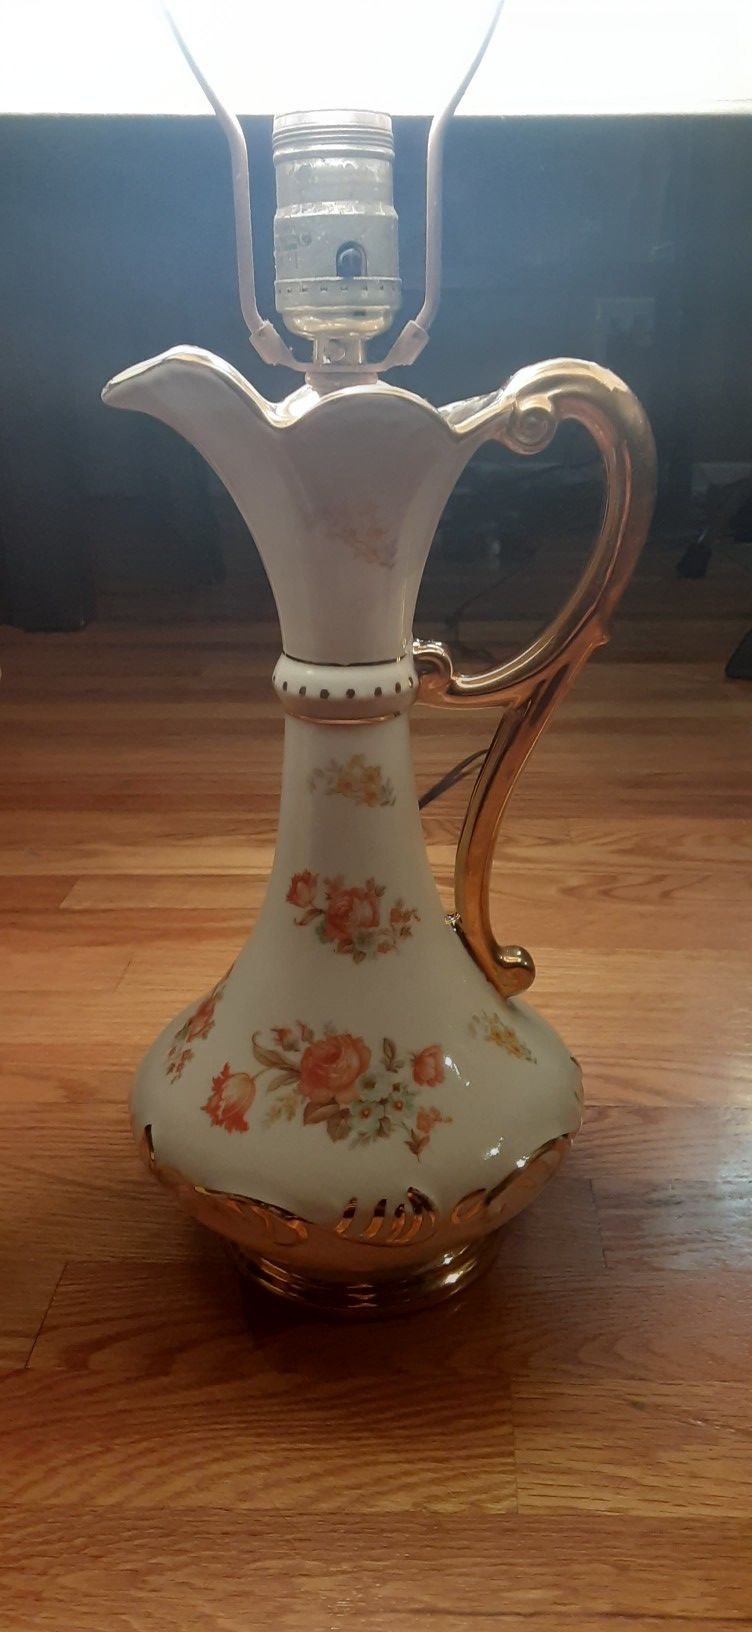 ANTIQUE PORCELAIN LAMP WORKS!!! THIS IS A PERFECT XMAS CHRISTMAS GIFT FOR MOM OR GRANDMA. AT $20 ITS A STEAL!!!